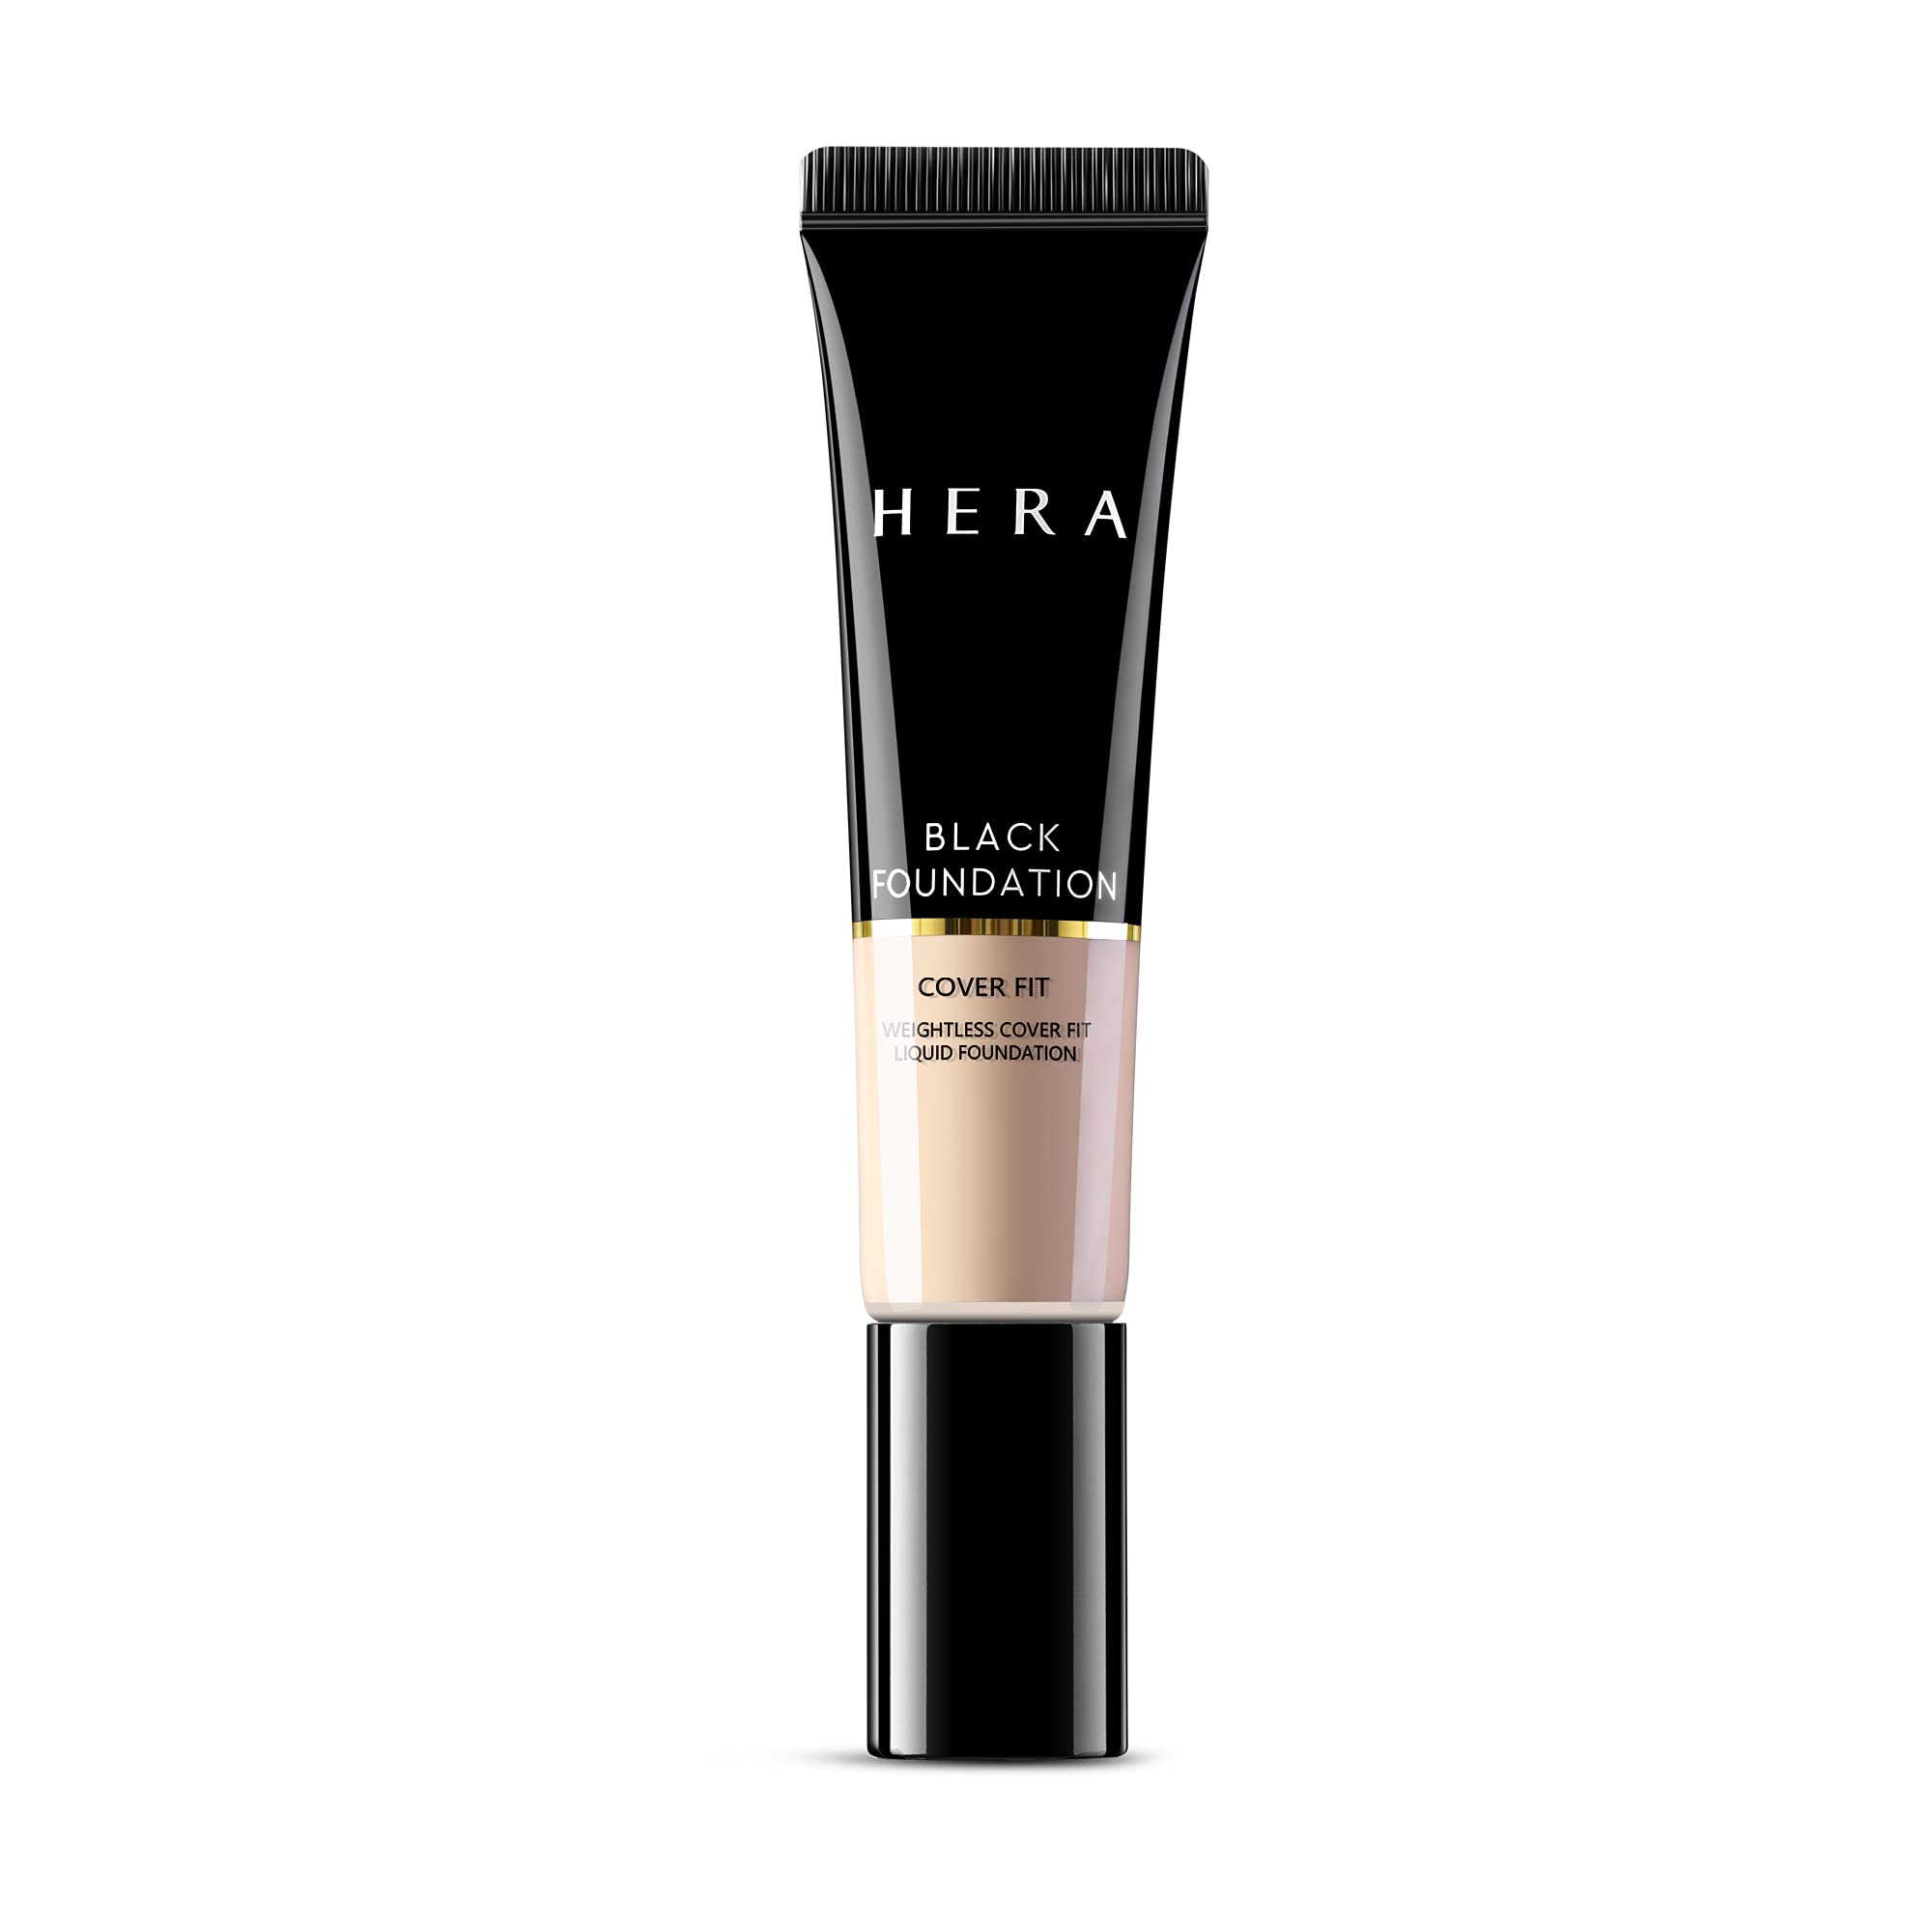 HERA Black Foundation Matte Makeup, Longwear and Oil-free, Jennie Picked Lightweight Cover Fit Liquid Concealer Foundation by Amorepacific (1.18 Fl...